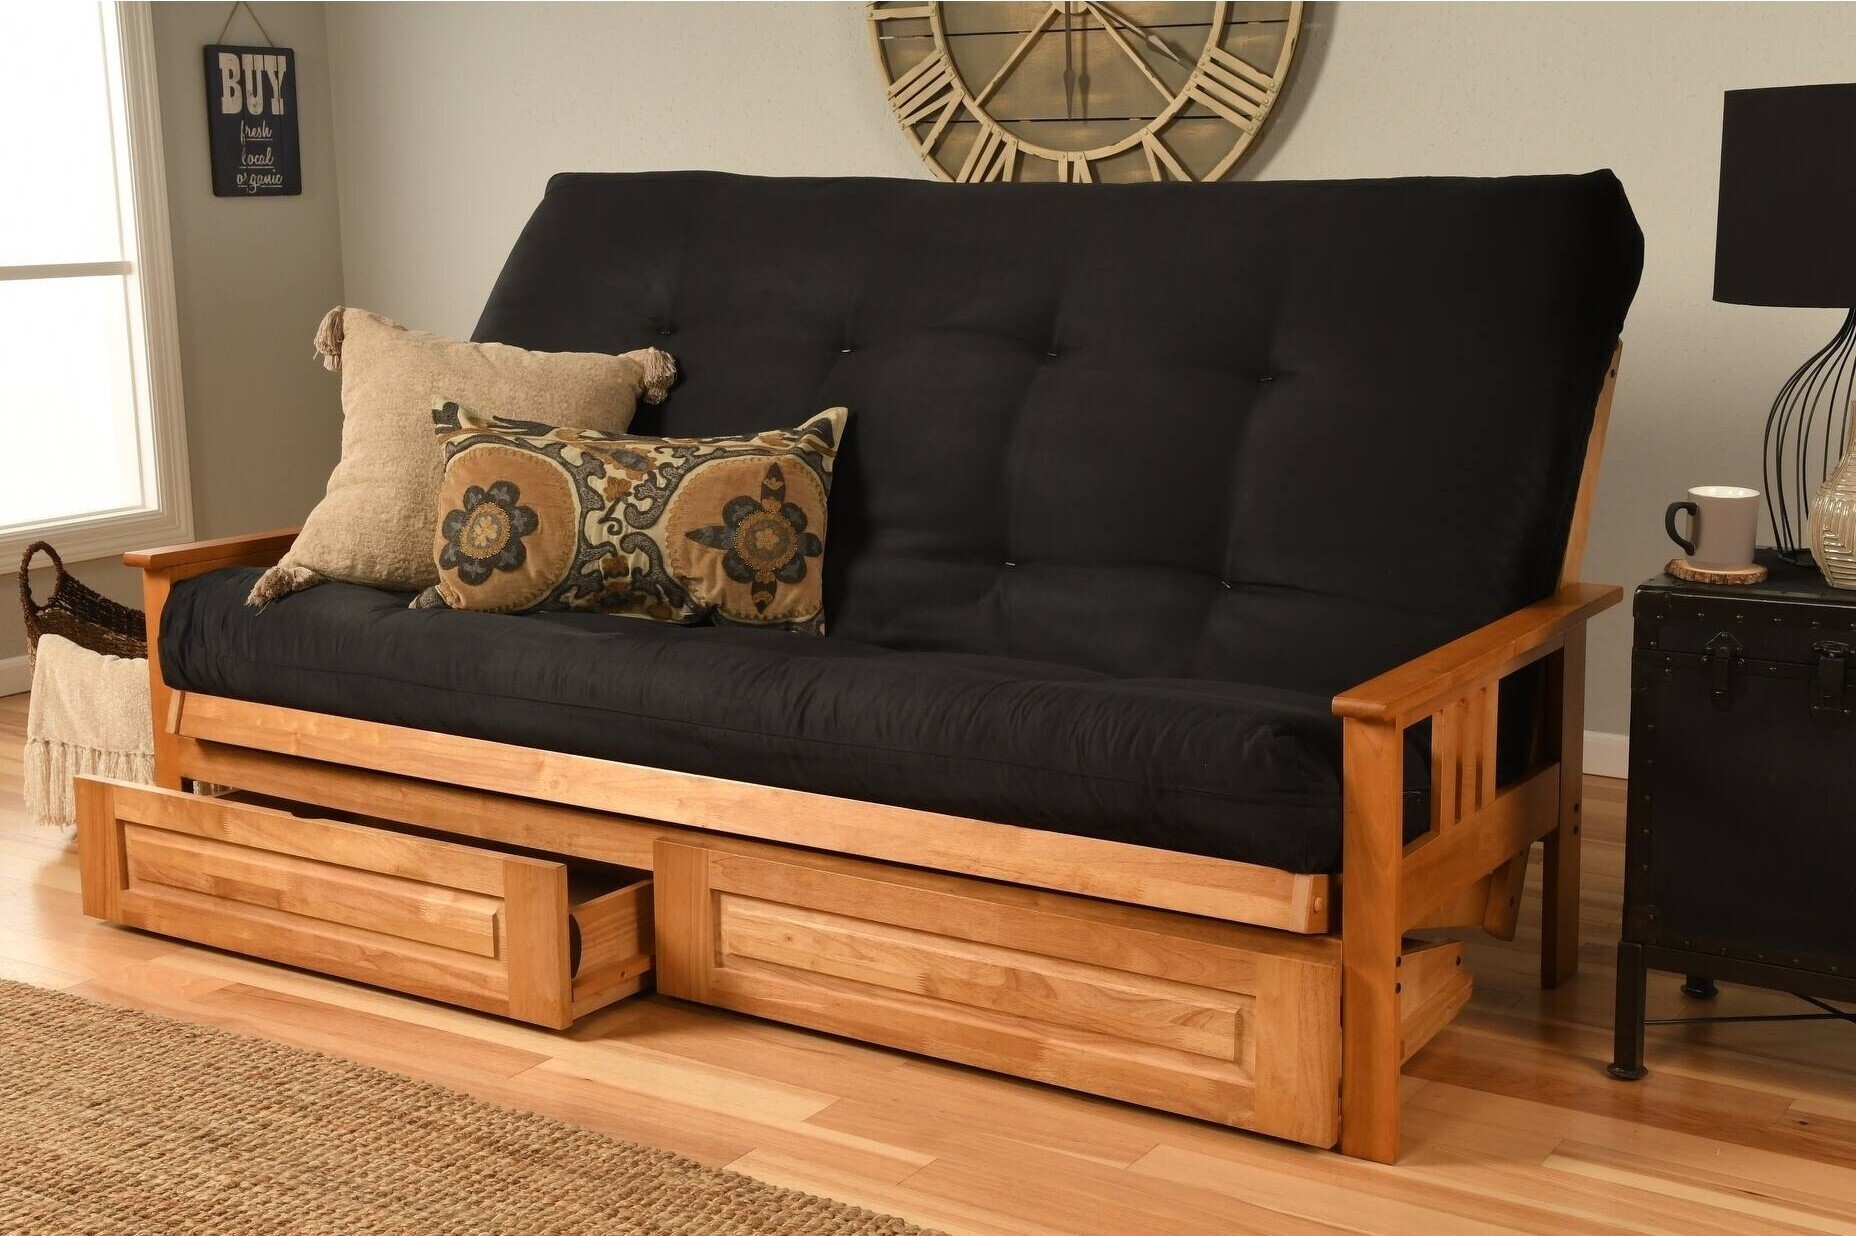 Need storage? Scout for a futon style convertible queen bed with drawers